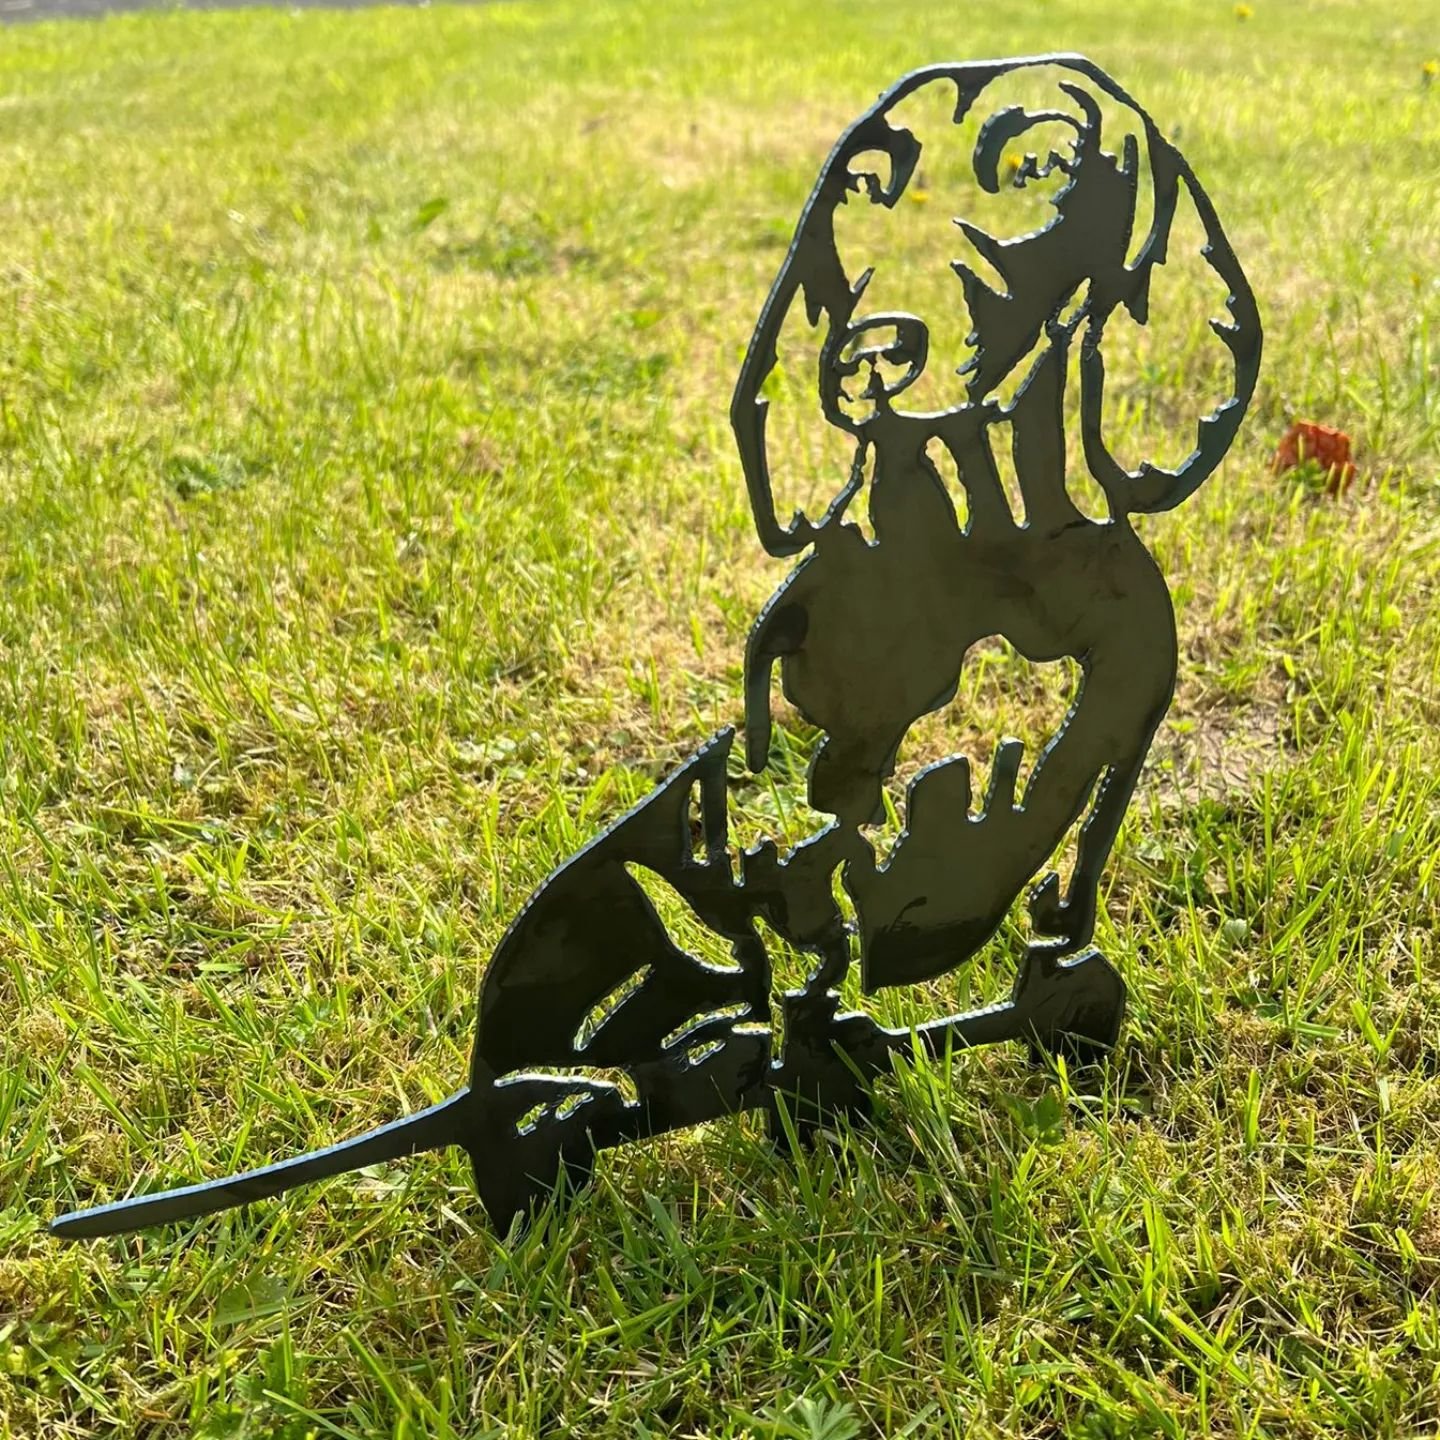 Simon is here!🐾

If you or someone you know loves Dachshunds, this is the perfect gift! Now available on the website - link in the bio.

#dachshund #sausagedog #doglover #metalart #gift #gardensculpture #rusticgifts #giftsforgarden #gardenart #garde